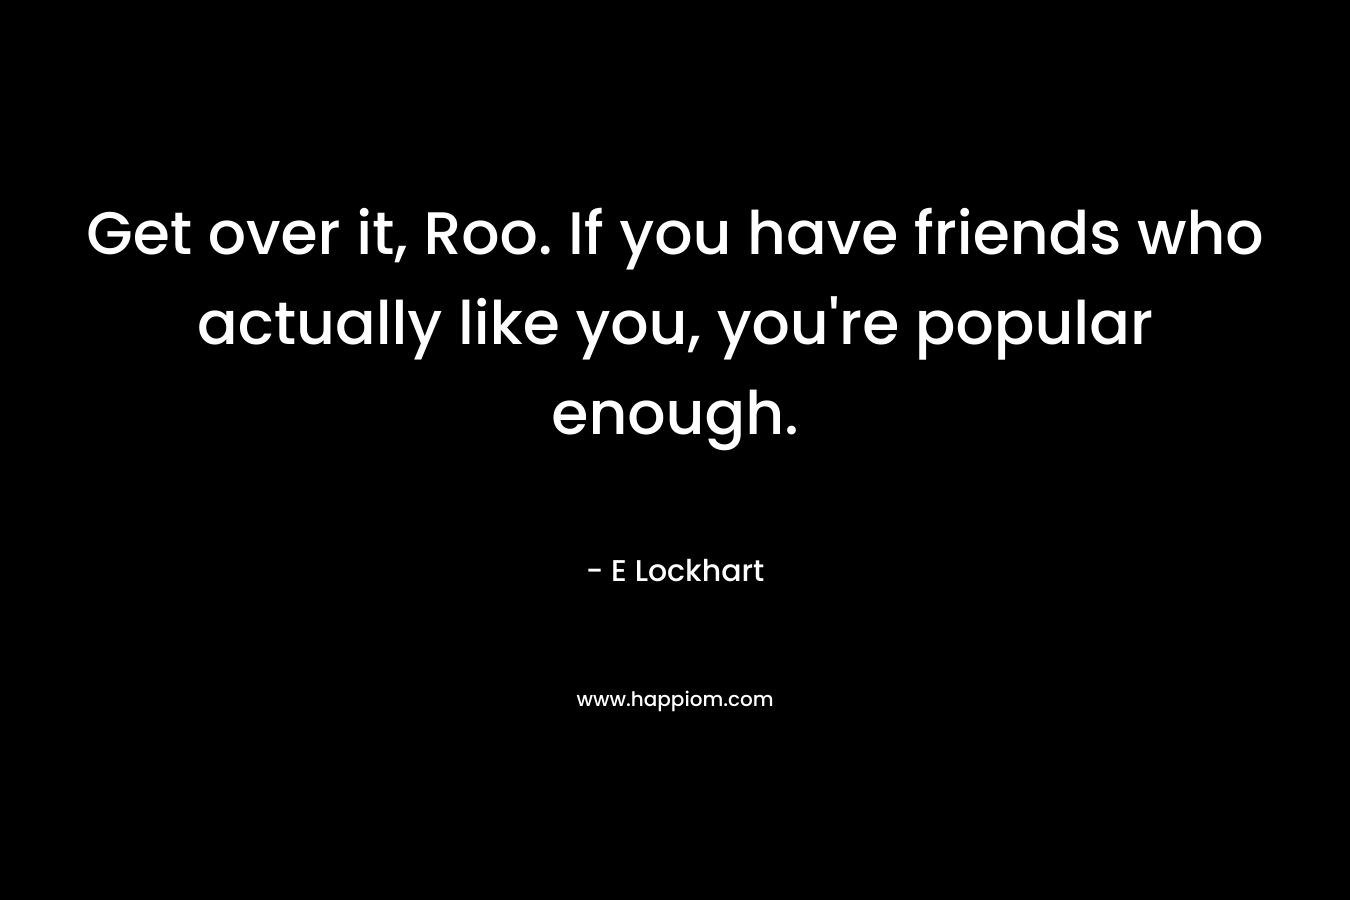 Get over it, Roo. If you have friends who actually like you, you’re popular enough. – E Lockhart